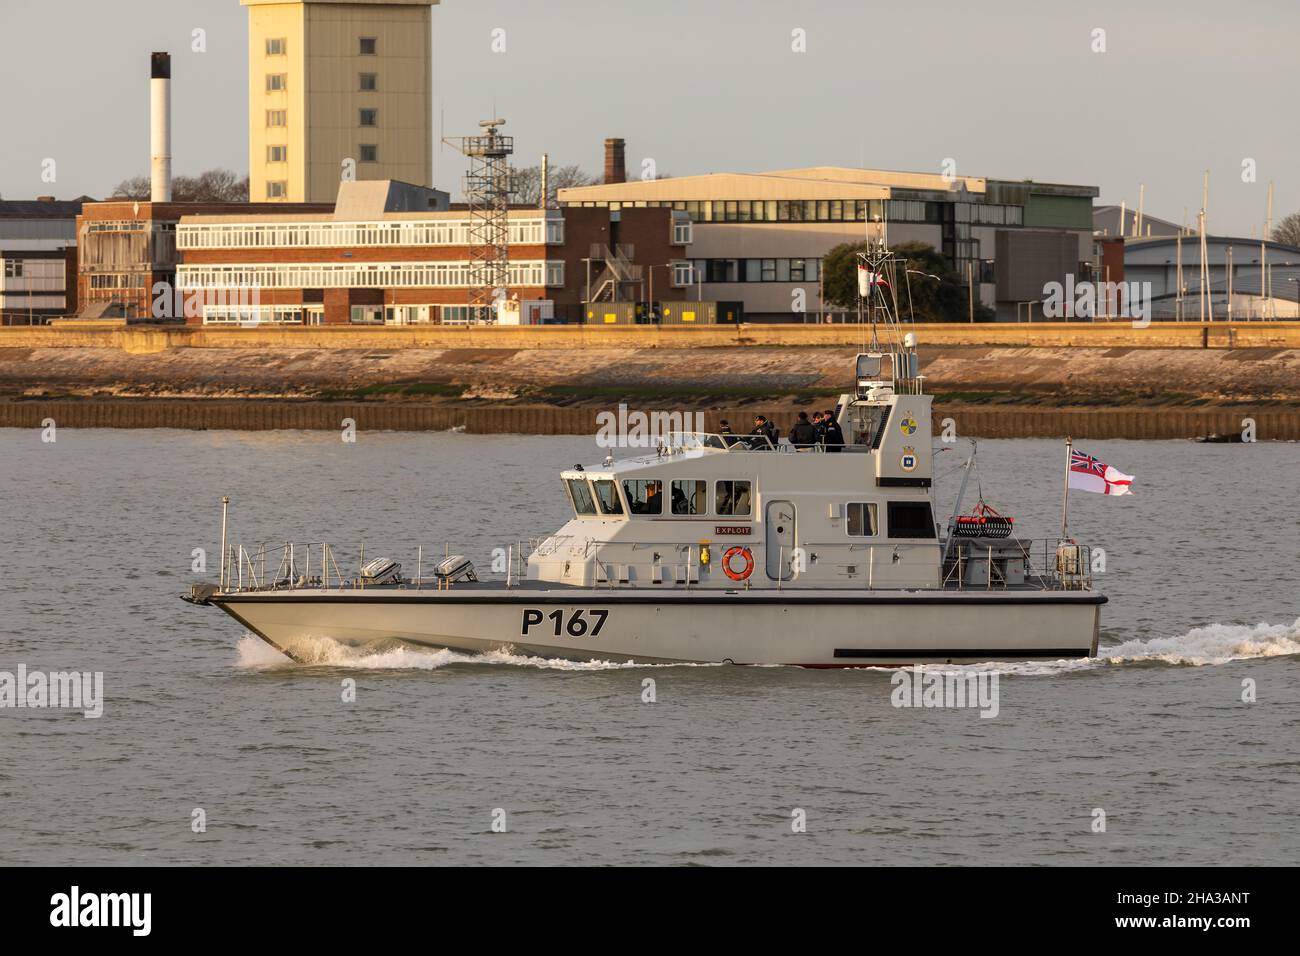 Archer-class patrol vessel HMS Exploit operating in the Solent. Stock Photo